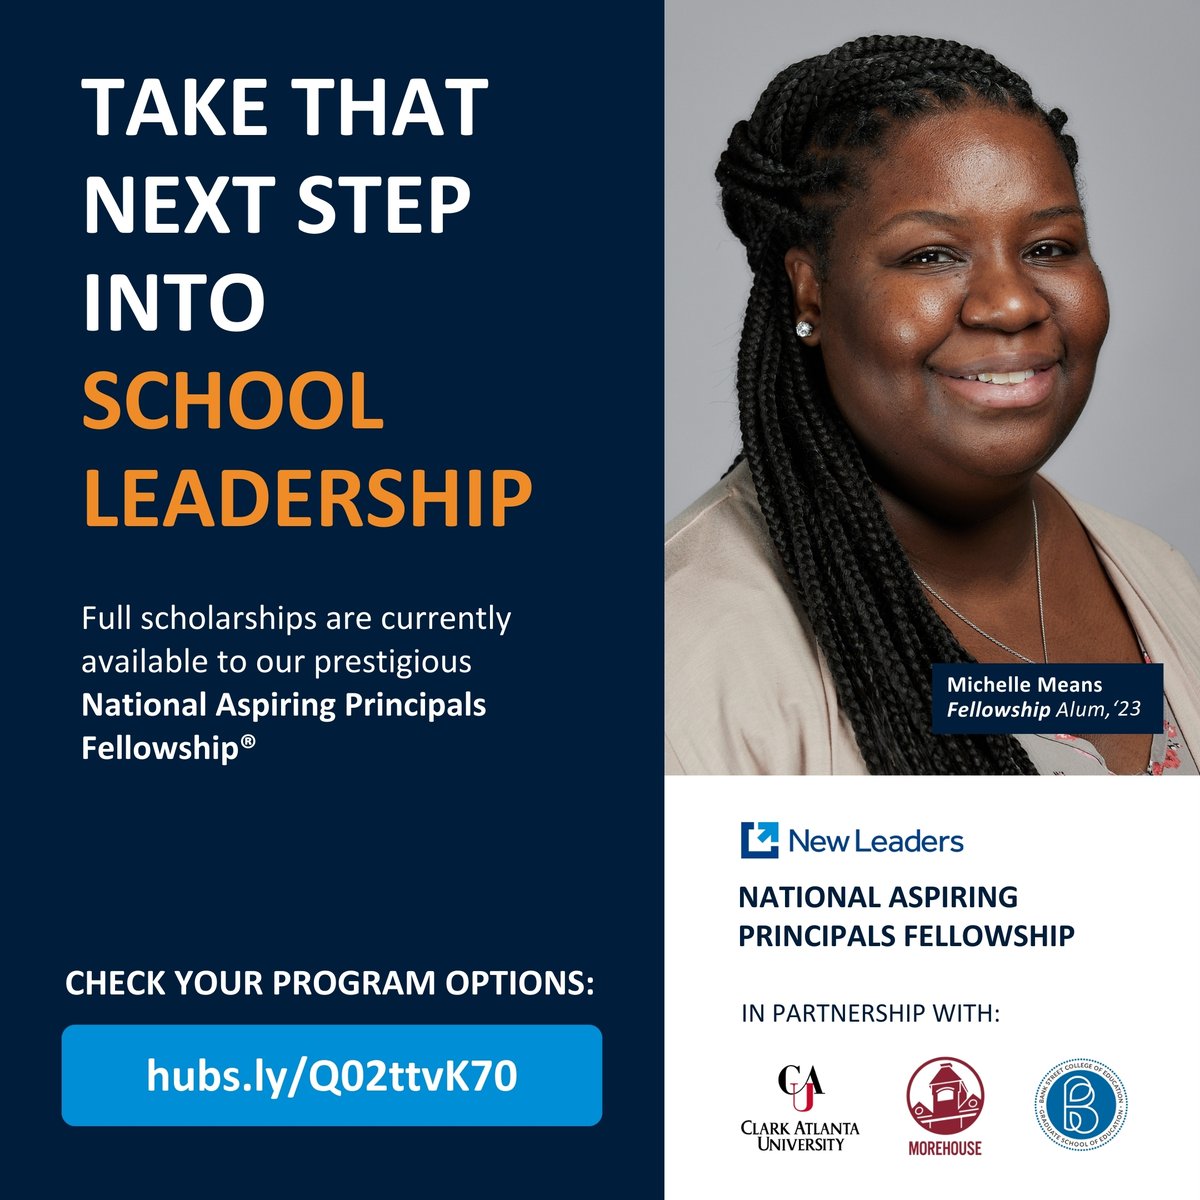 Ready to make an impact? Our National Aspiring Principals Fellowship® awaits, with full scholarships available for dedicated educators. Experience personalized coaching, ongoing support, and a pathway to principal certification. Check your program options: hubs.ly/Q02vkBZp0